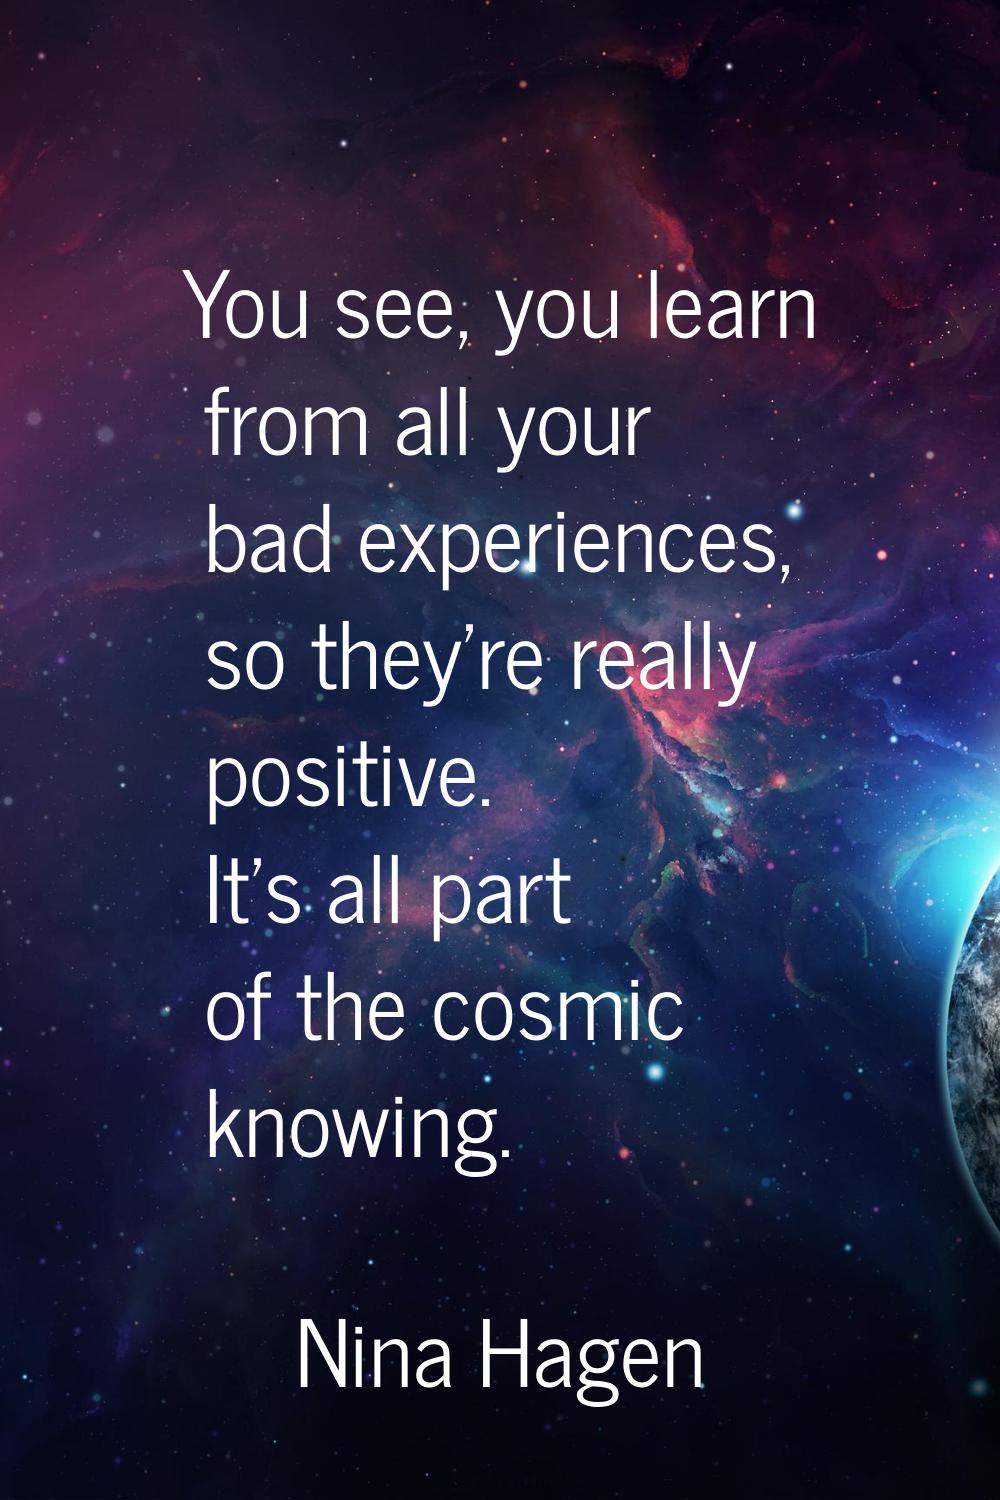 You see, you learn from all your bad experiences, so they're really positive. It's all part of the 